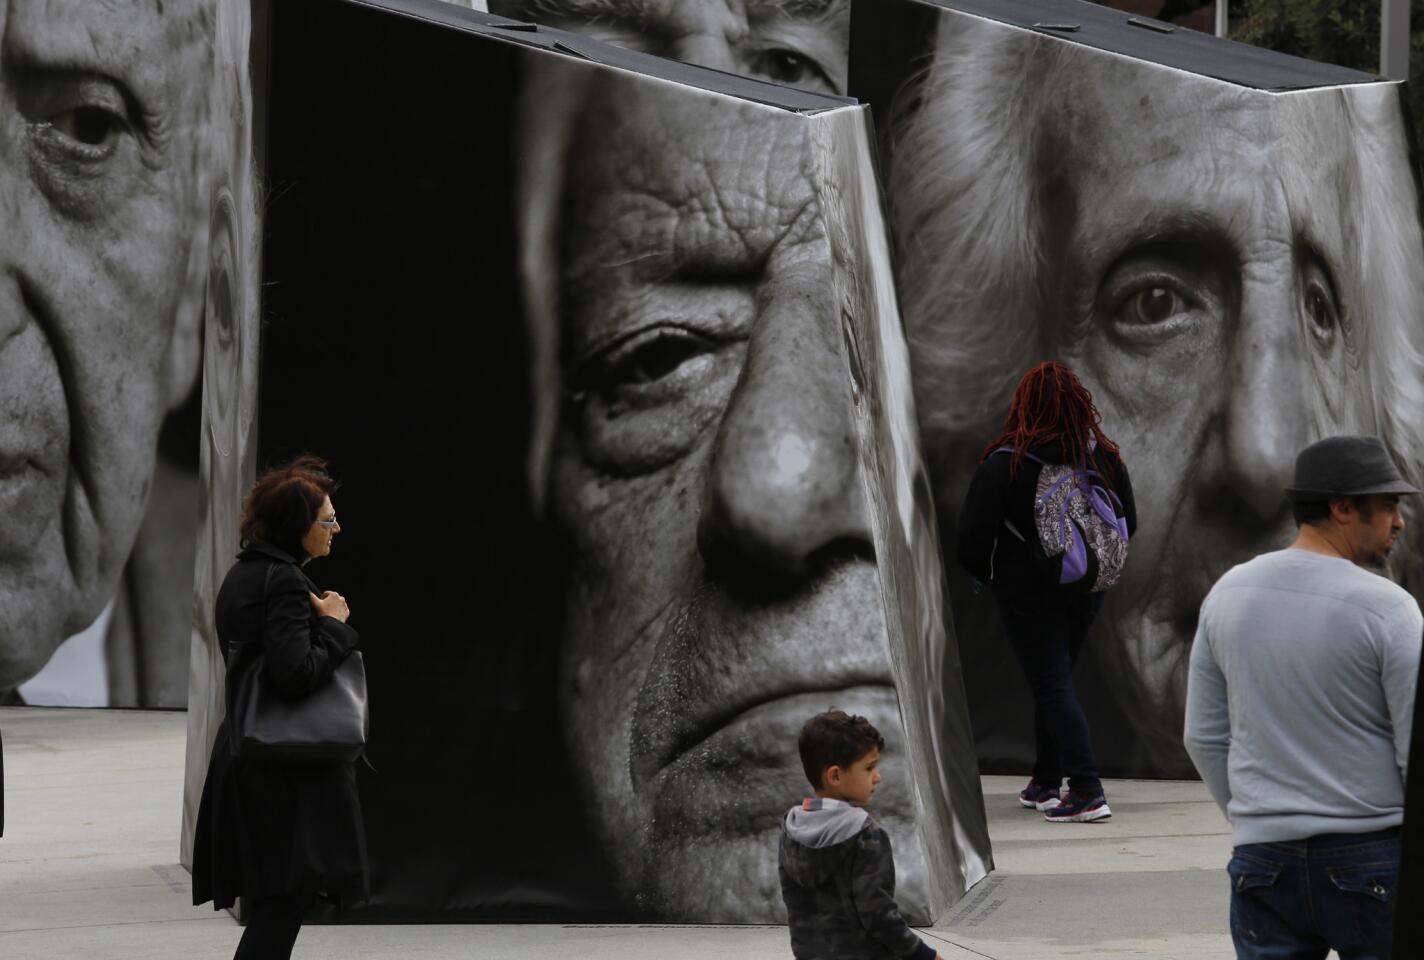 An interactive art project called "iwitness," telling the story of survivors of the Armenian genocide of 1915, was unveiled in Grand Park in downtown Los Angeles on Saturday afternoon.